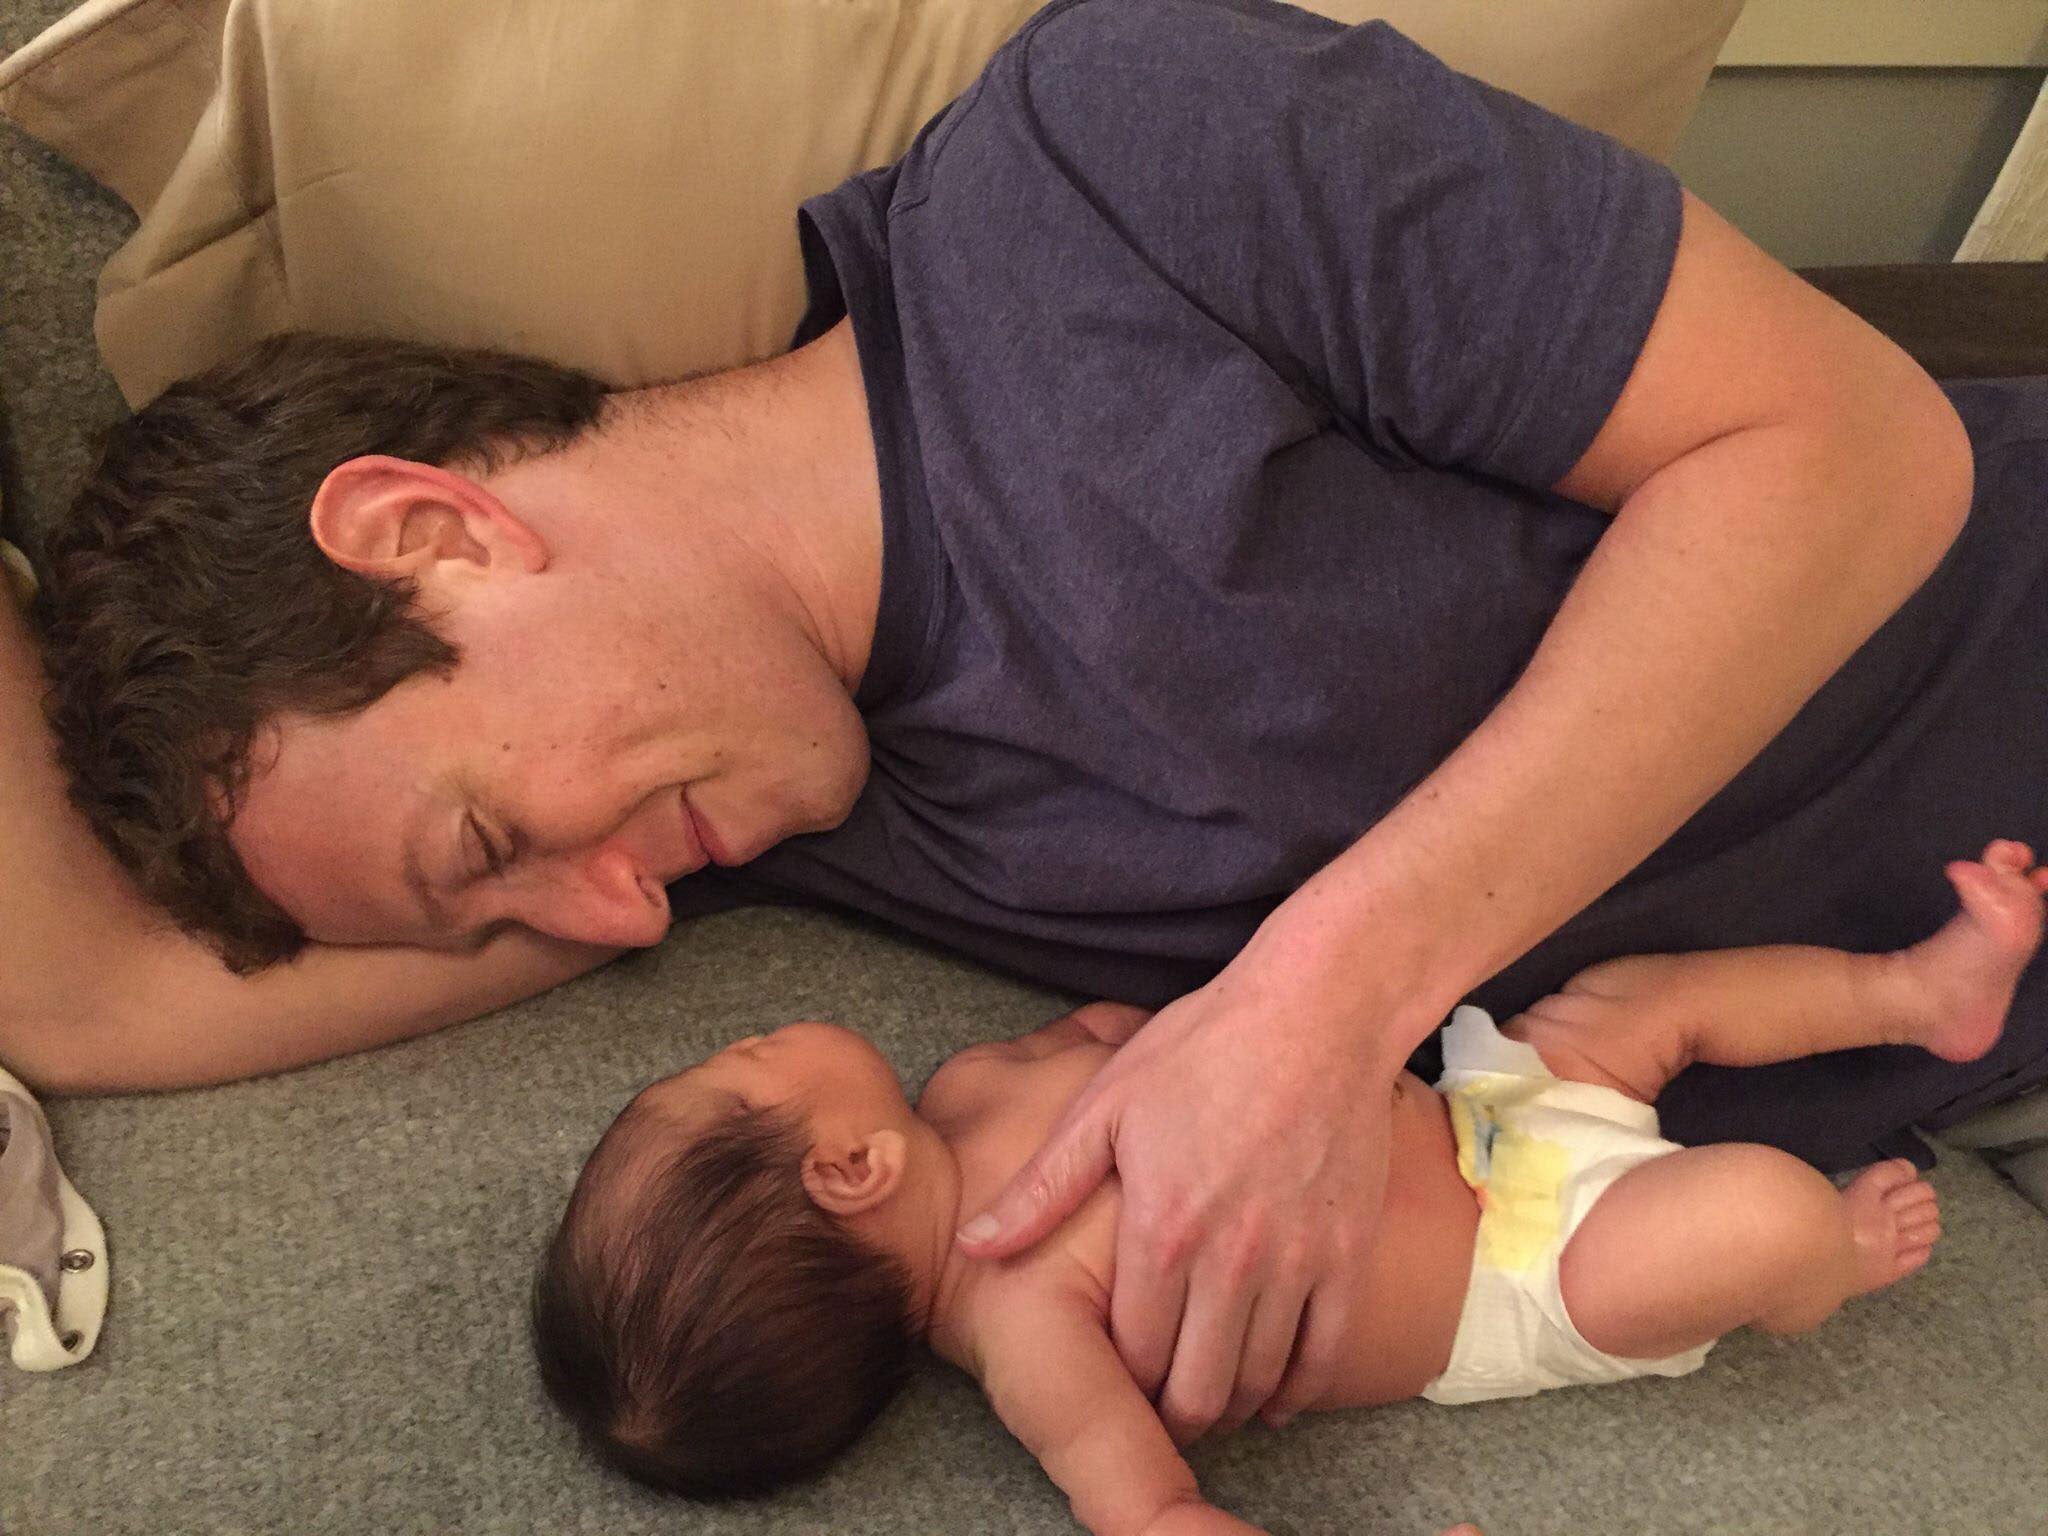 Mark Zuckerberg shared a photo of himself with his baby daughter on Facebook